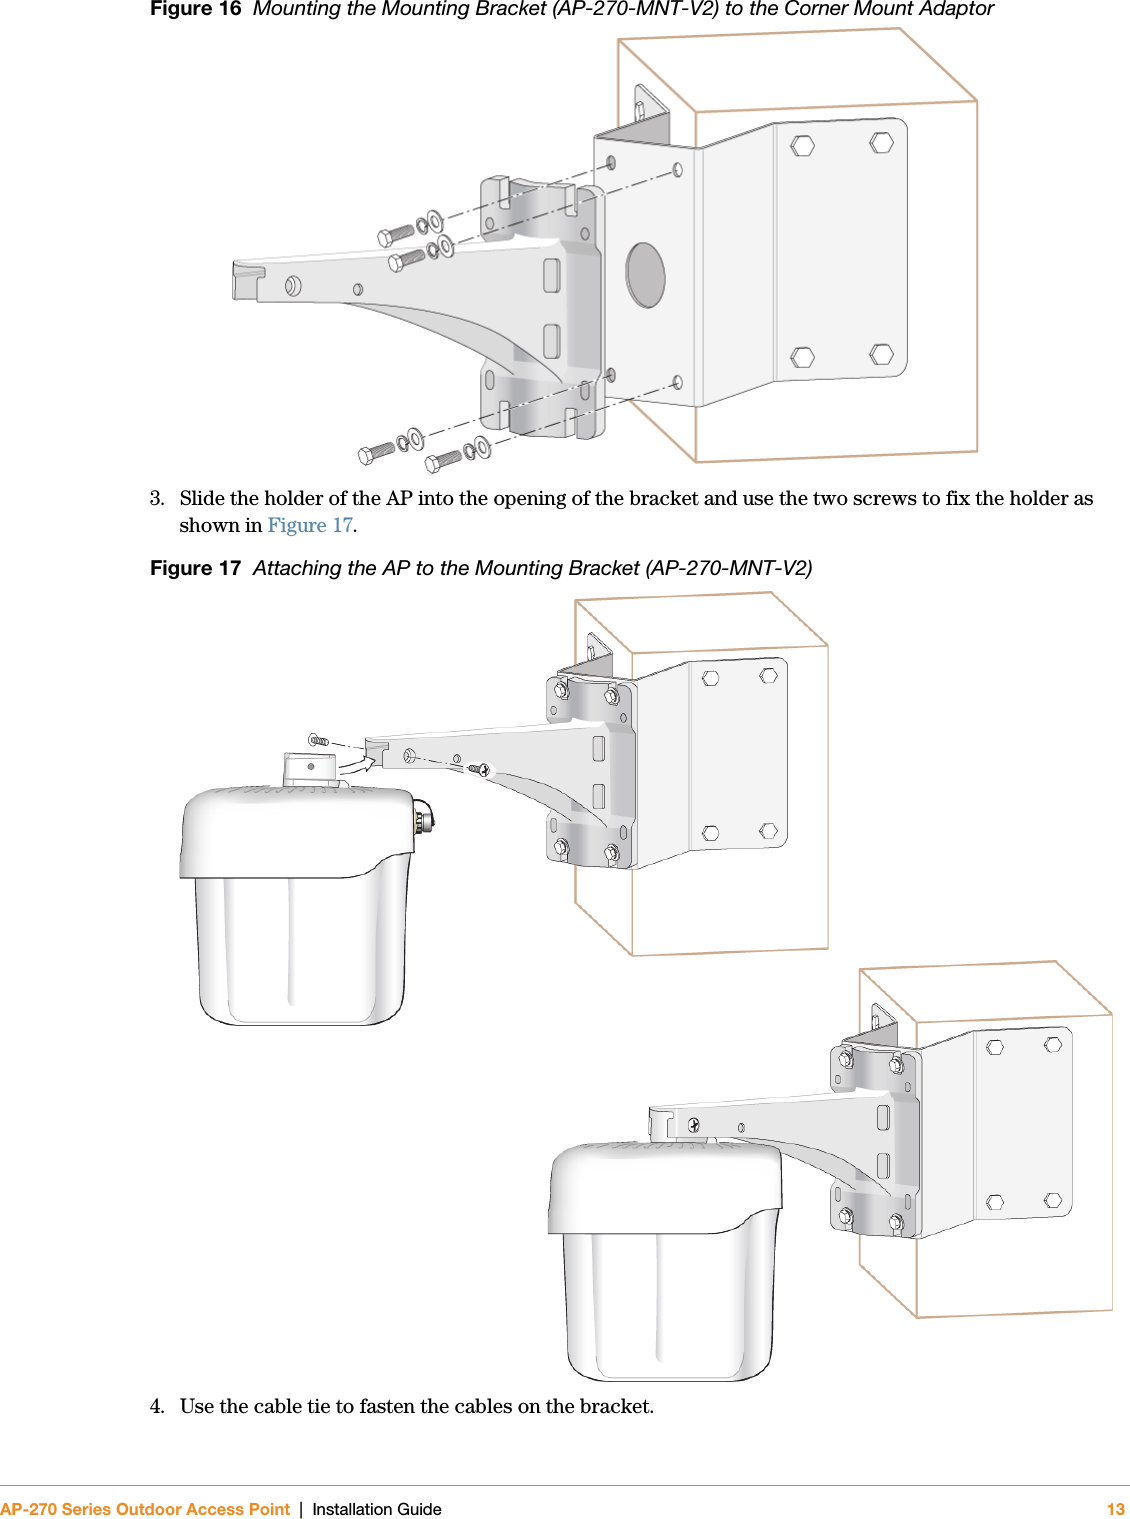 AP-270 Series Outdoor Access Point | Installation Guide 13Figure 16  Mounting the Mounting Bracket (AP-270-MNT-V2) to the Corner Mount Adaptor3. Slide the holder of the AP into the opening of the bracket and use the two screws to fix the holder as shown in Figure 17.Figure 17  Attaching the AP to the Mounting Bracket (AP-270-MNT-V2)4. Use the cable tie to fasten the cables on the bracket.